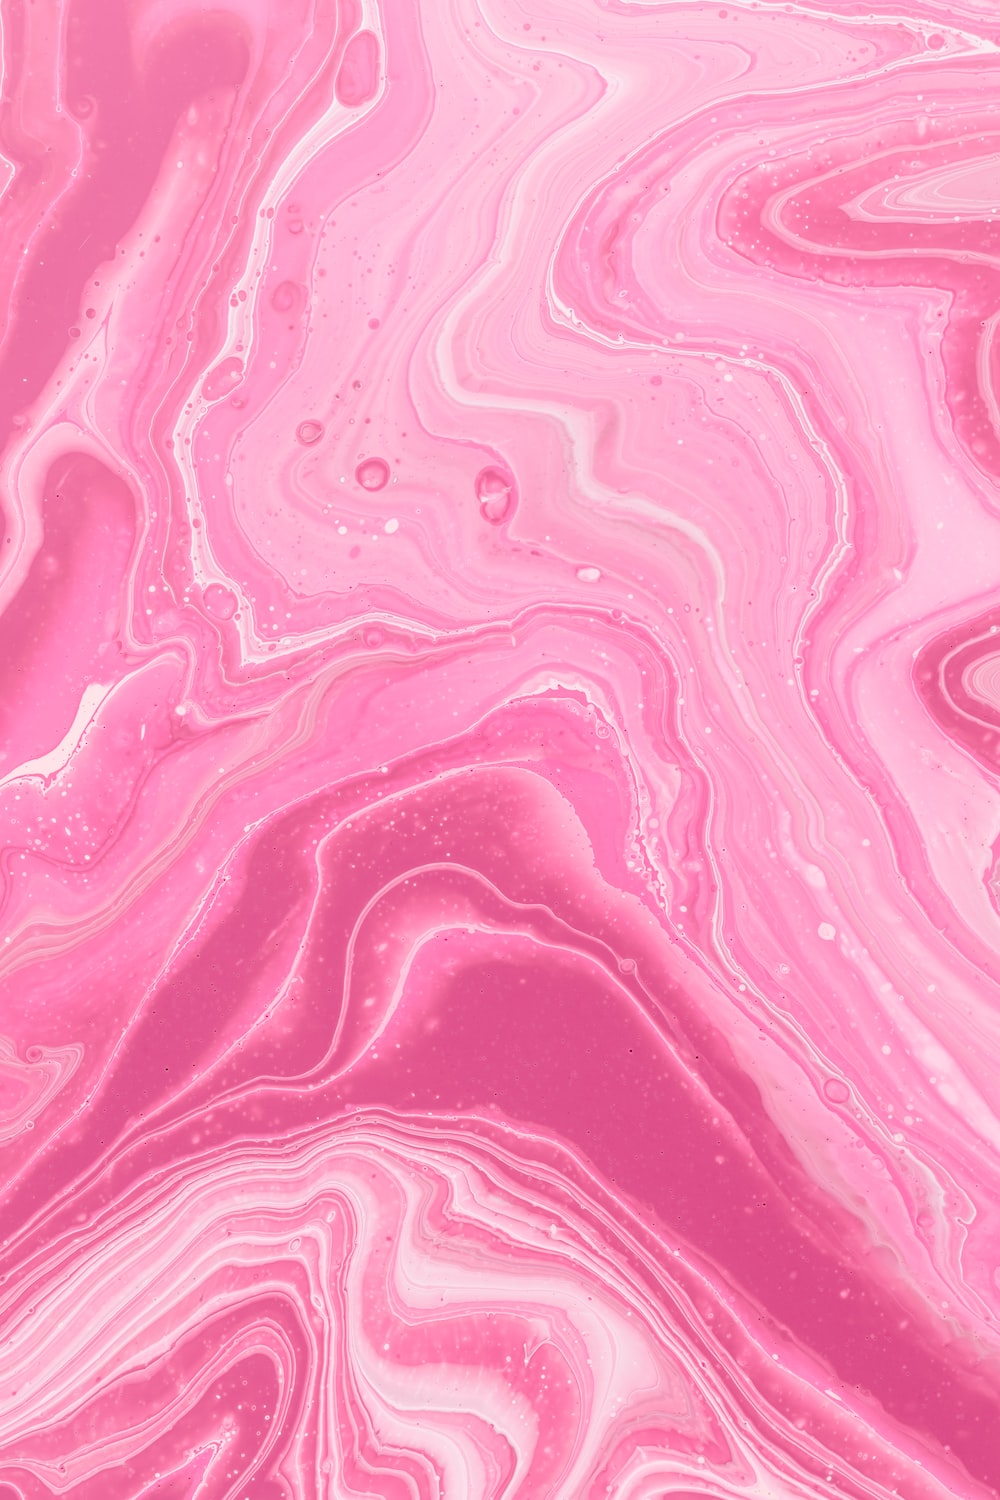 1k Pink Abstract Pictures Image